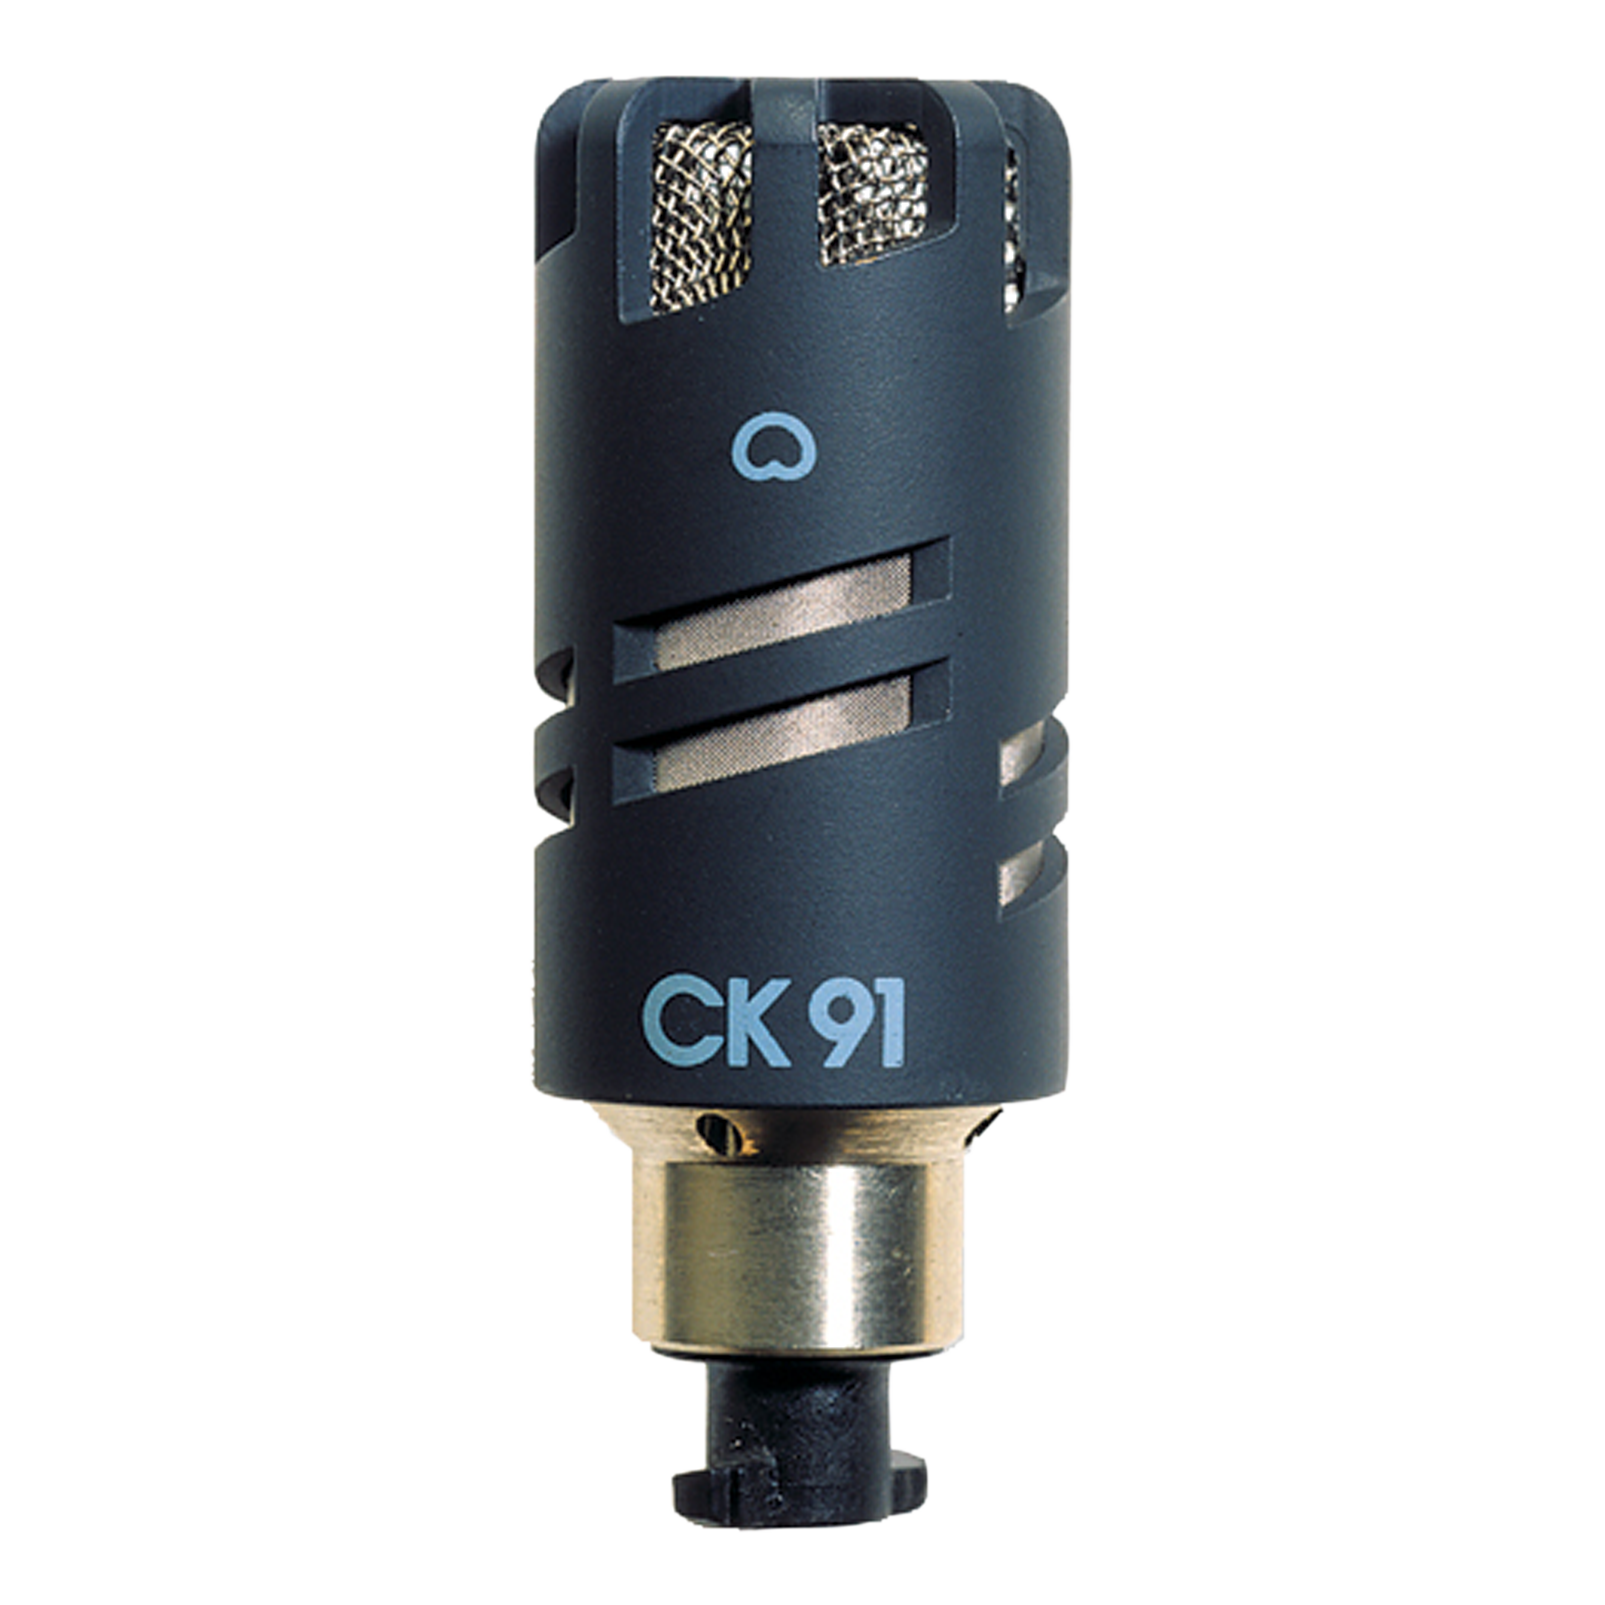 CK91 (discontinued) - Grey - High performance cardioid condenser microphone capsule - Hero